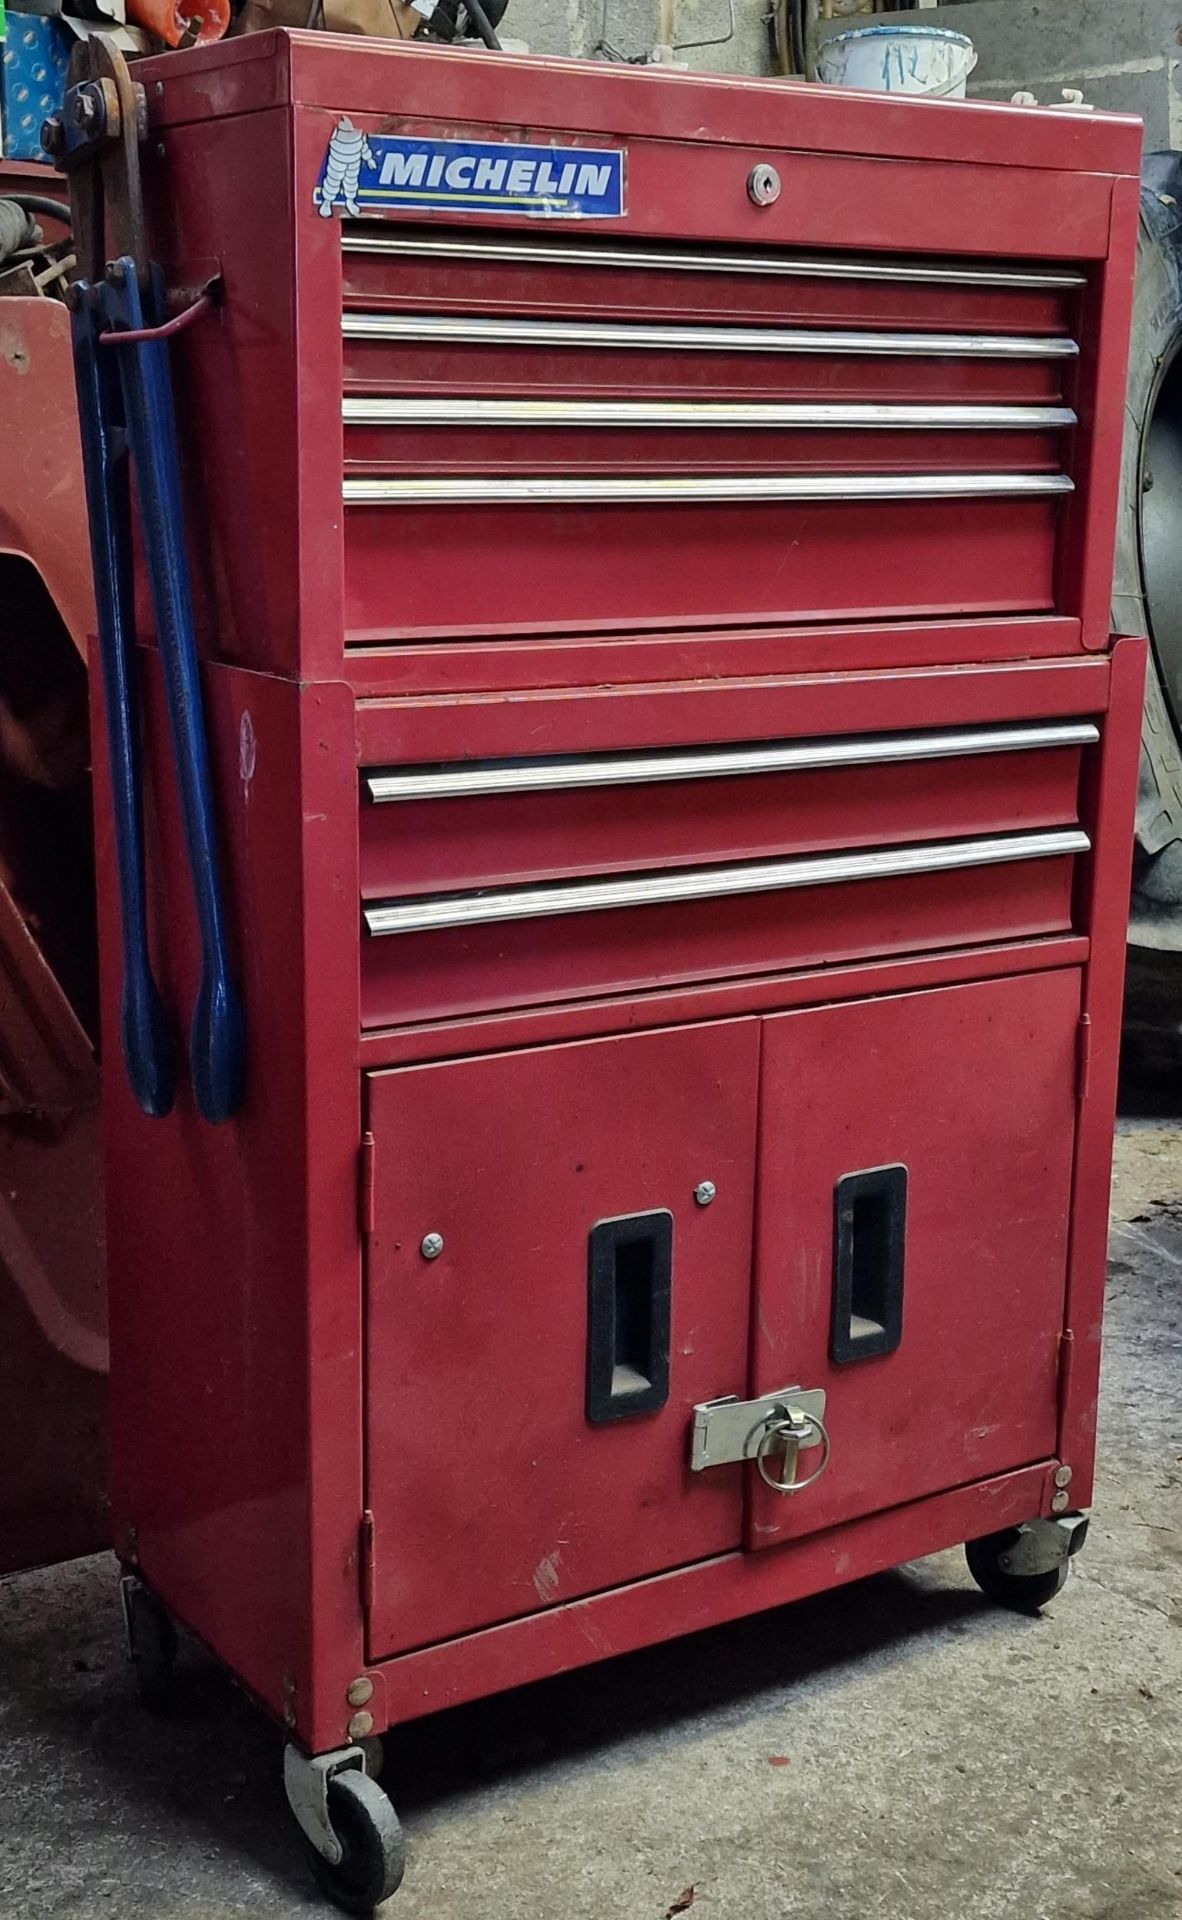 Metal two tier stacking tool cabinet complete with a large assortment of good tools and hardware,